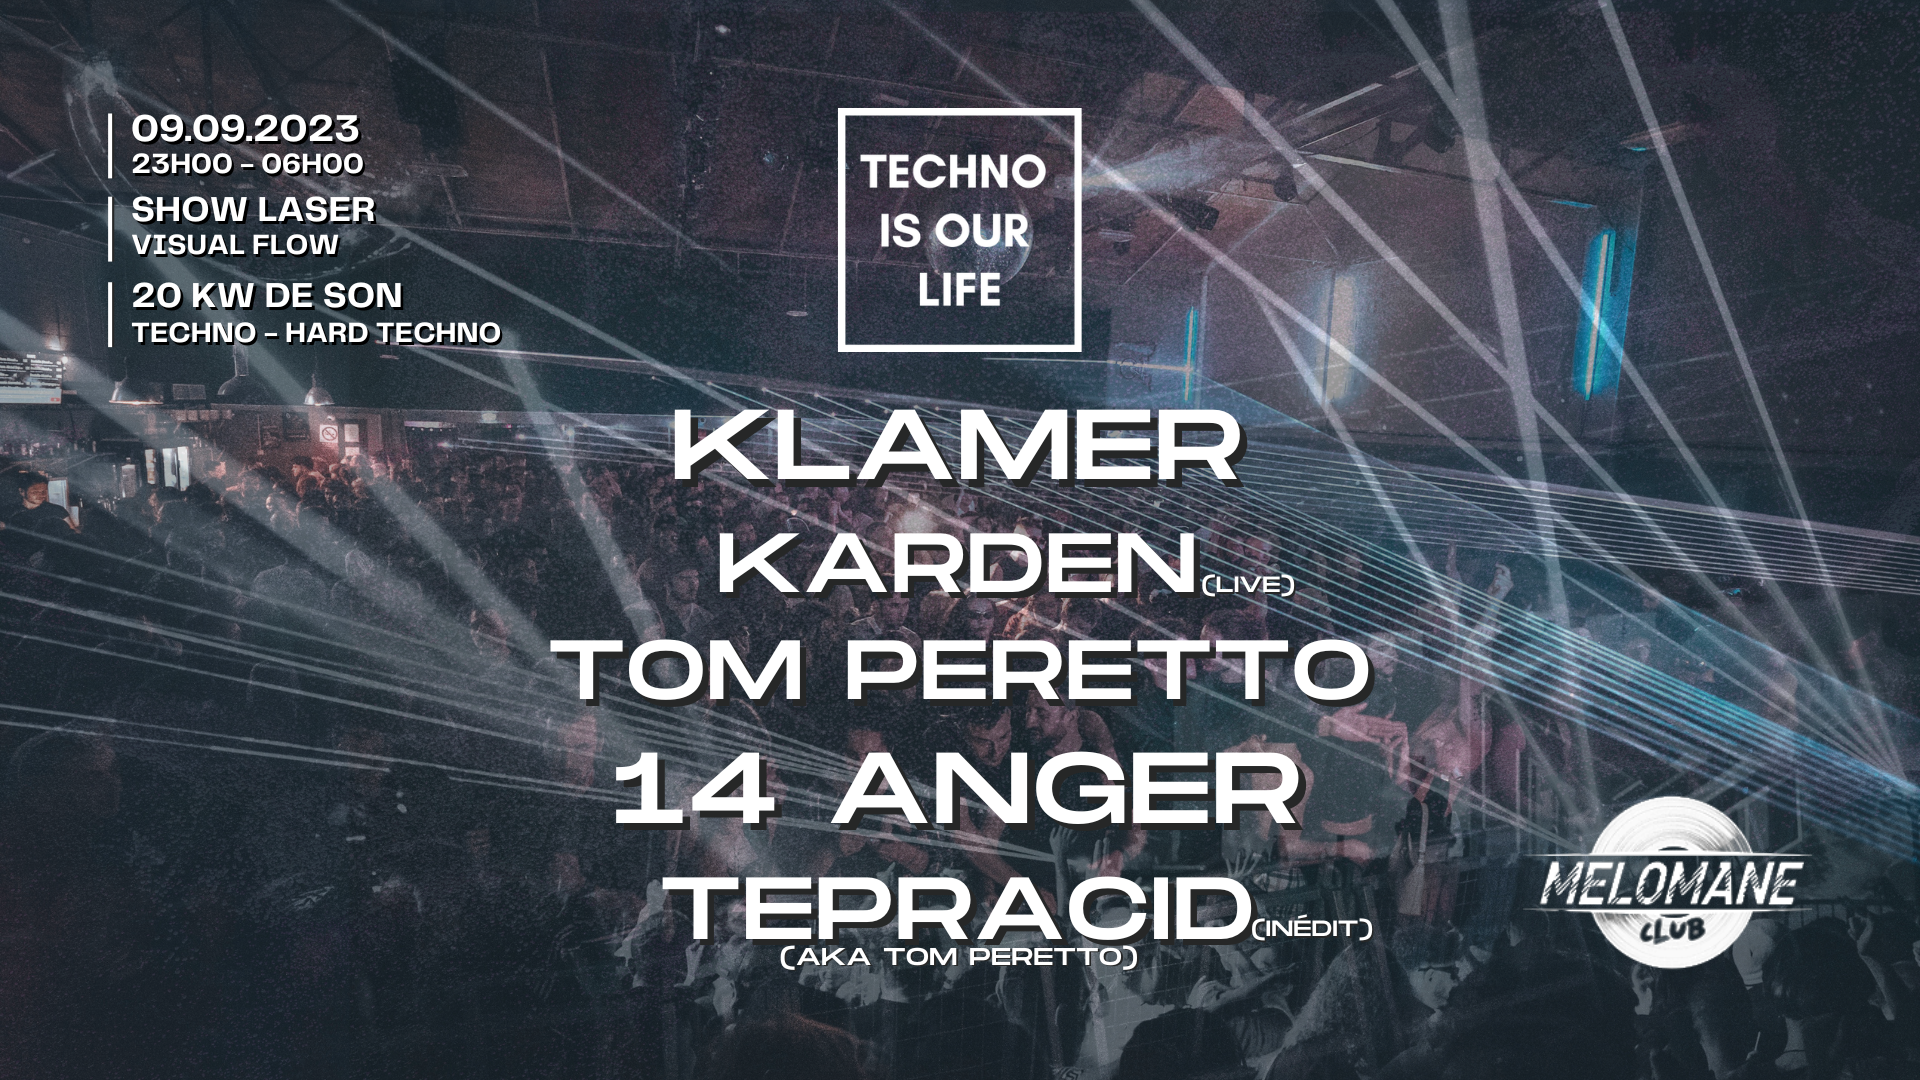 Techno Is Our Life with KLAMER - 14 Anger - Karden - Tom Peretto - TePrAcId - Página frontal